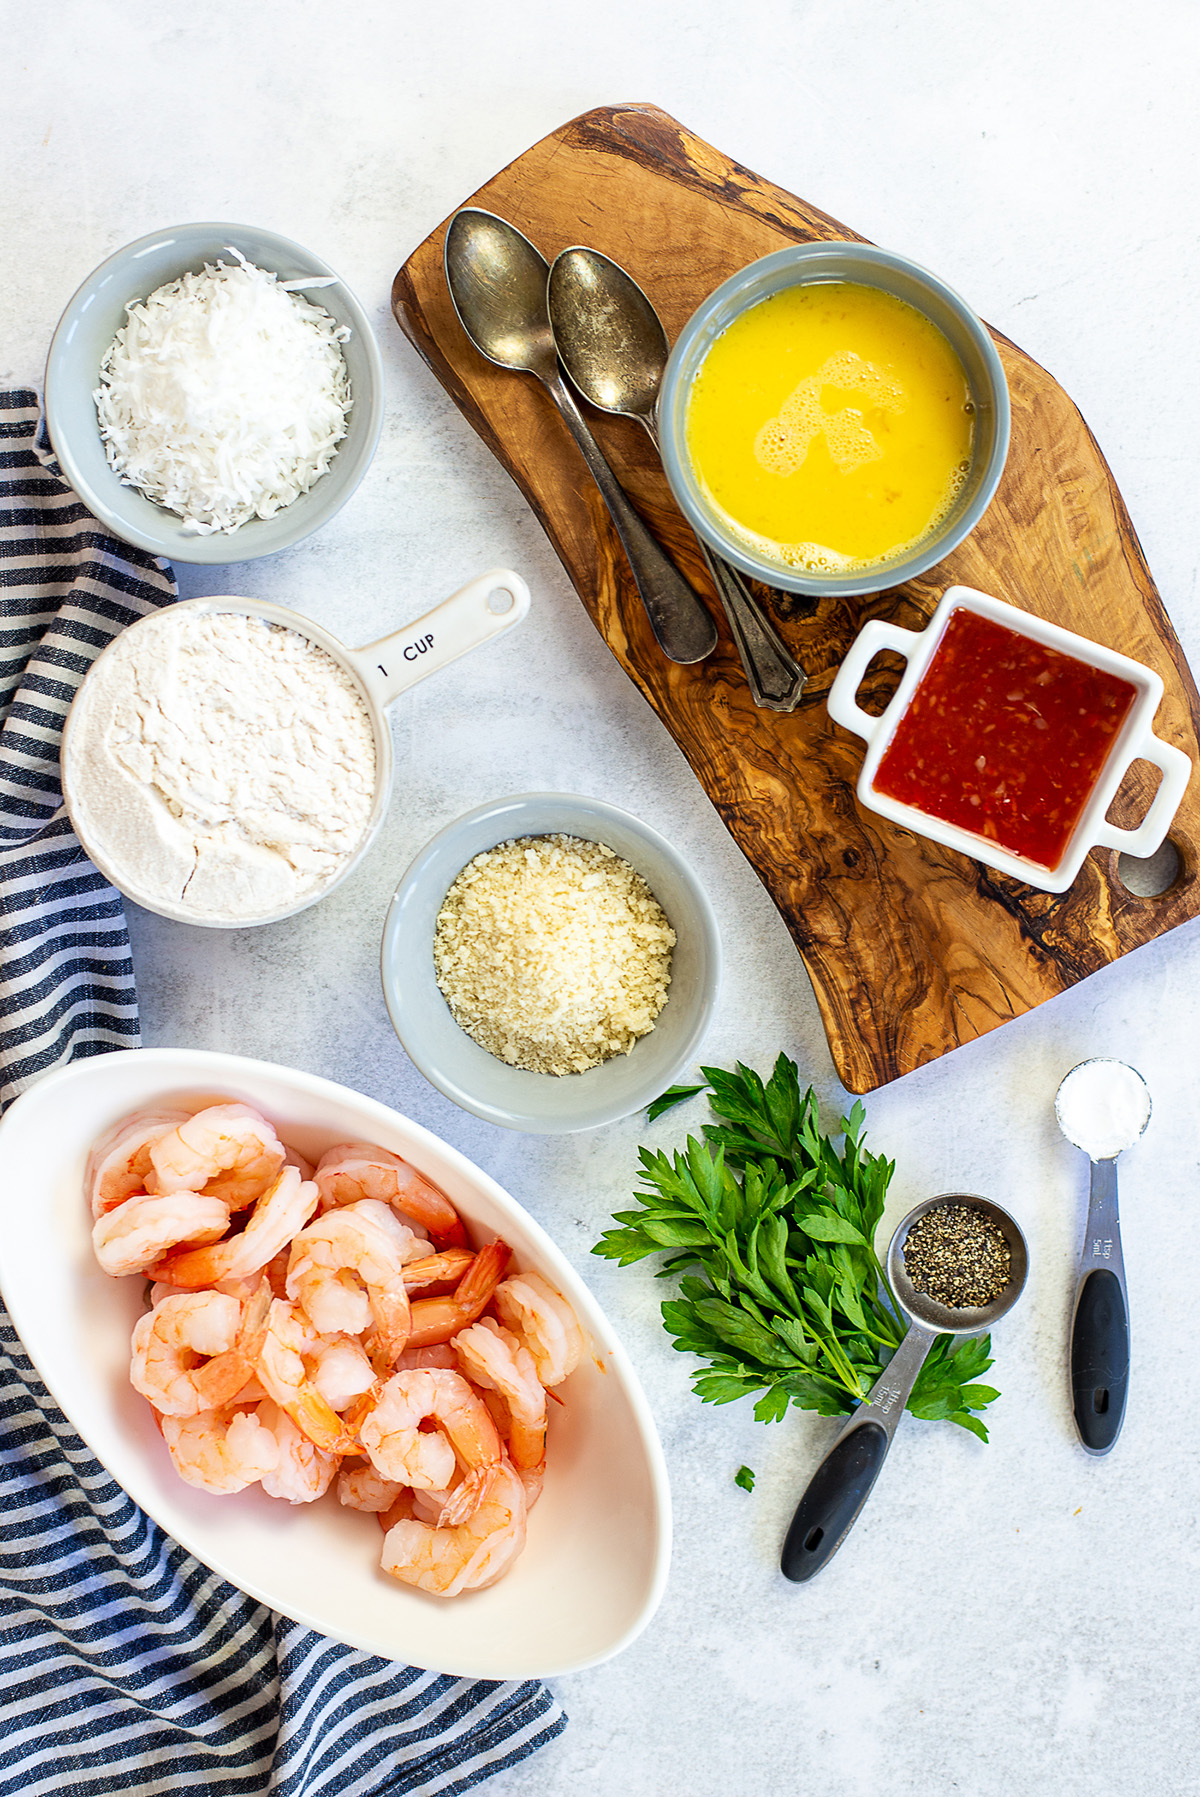 Coconut shrimp ingredients spread out on a countertop.